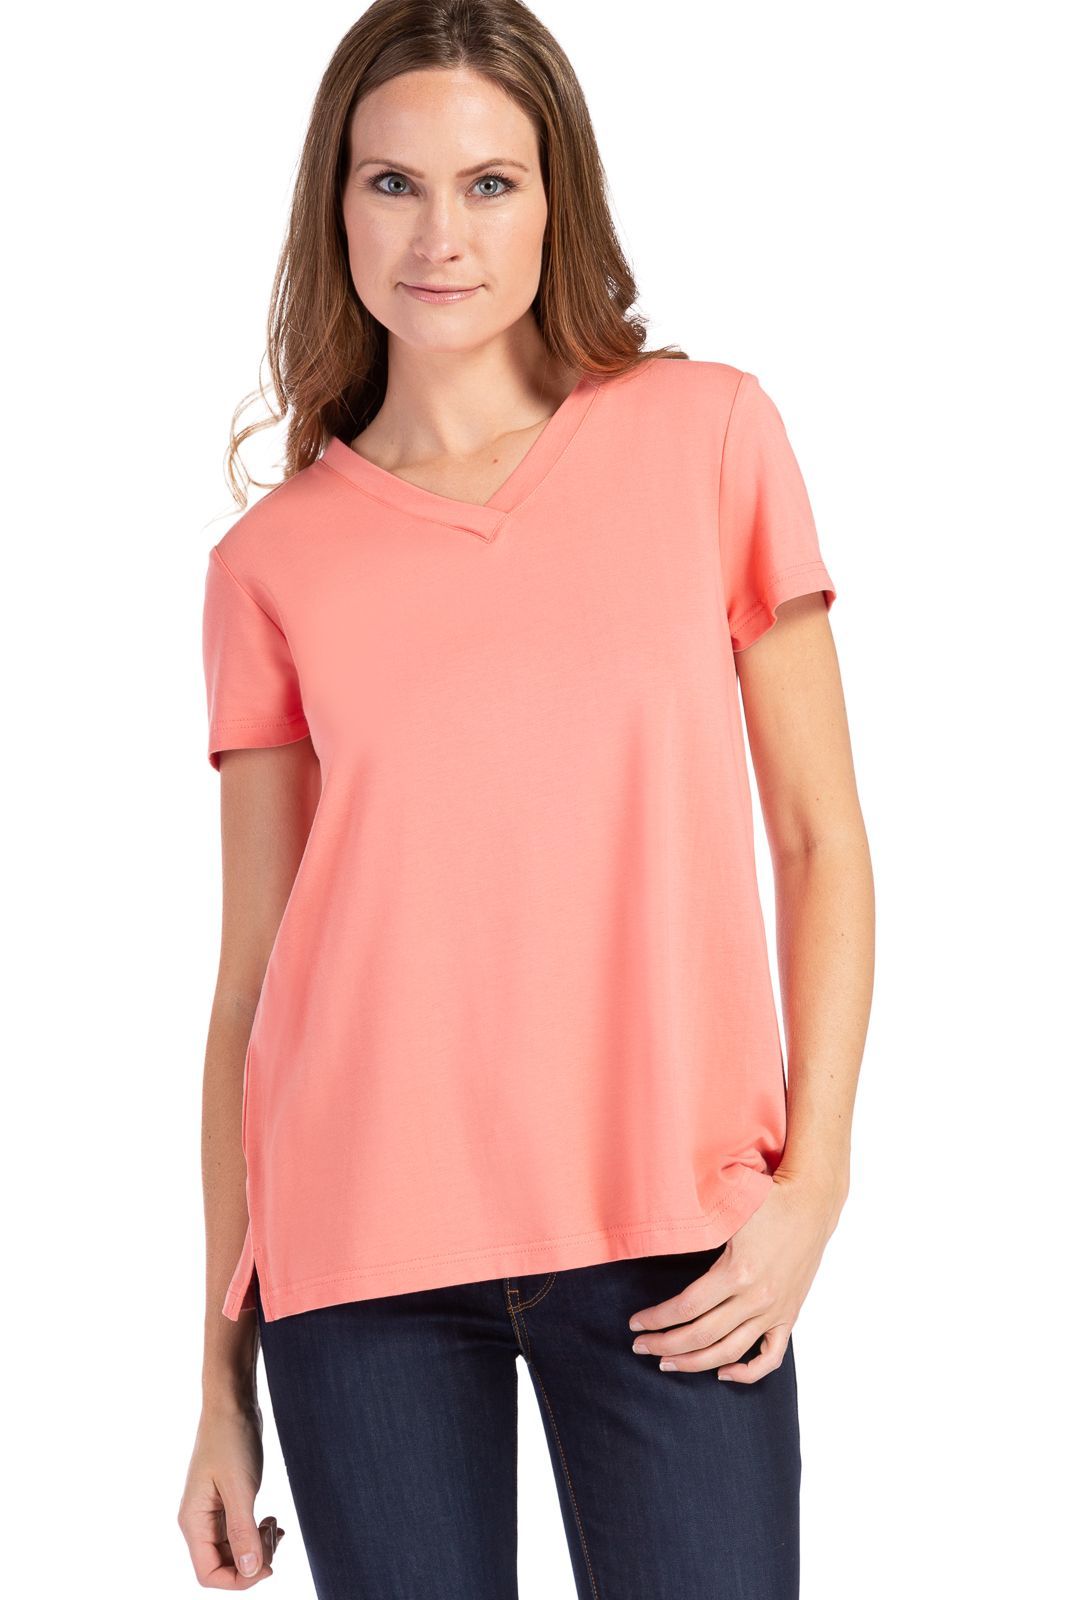 Women's Relaxed EcoFabric™ V-Neck Tee Womens>Casual>Top Fishers Finery Coral X-Small 